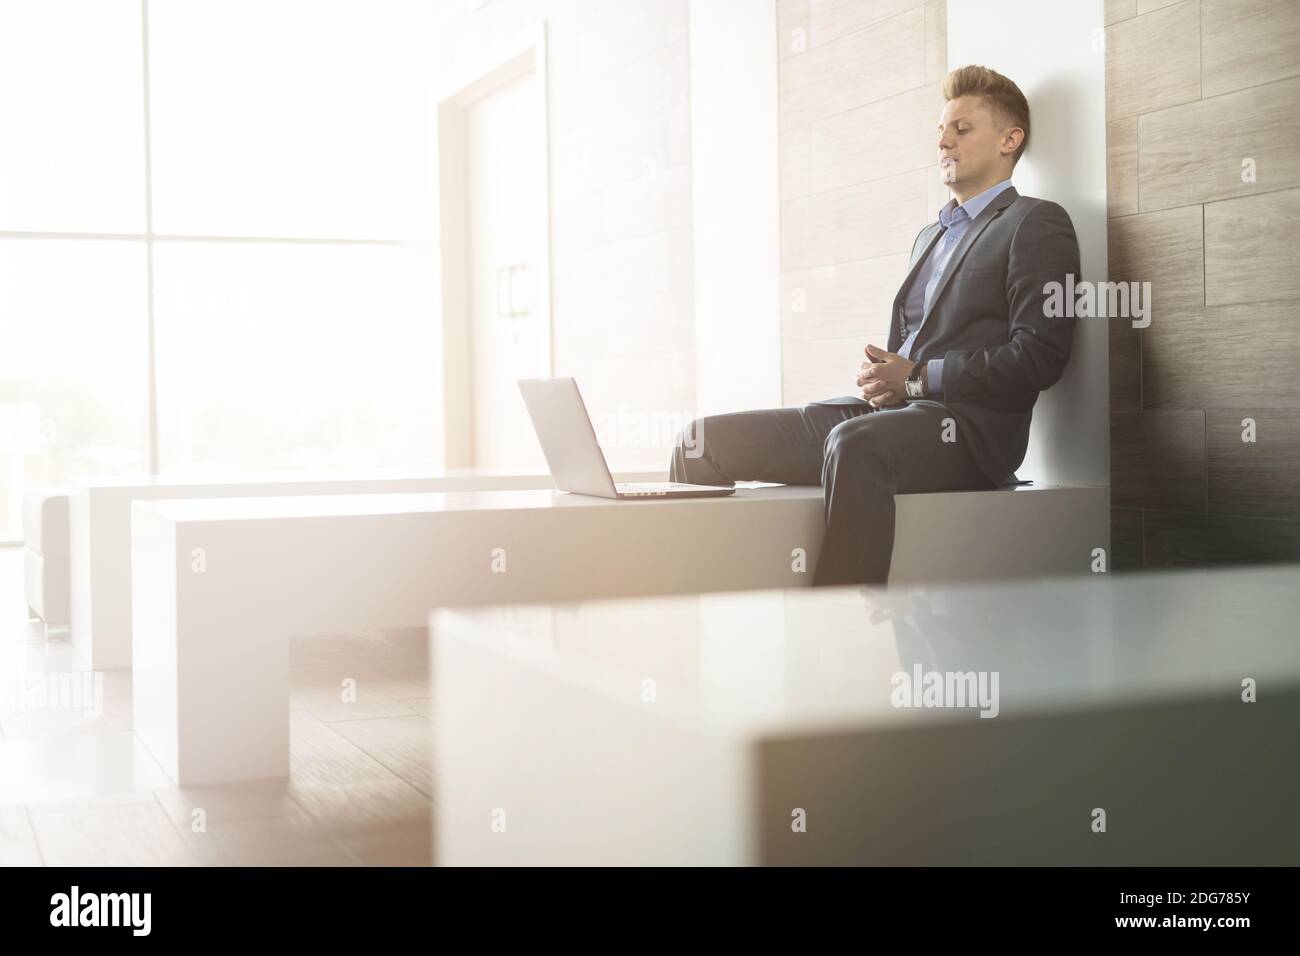 Business man sitting alone on a bench with laptop Stock Photo